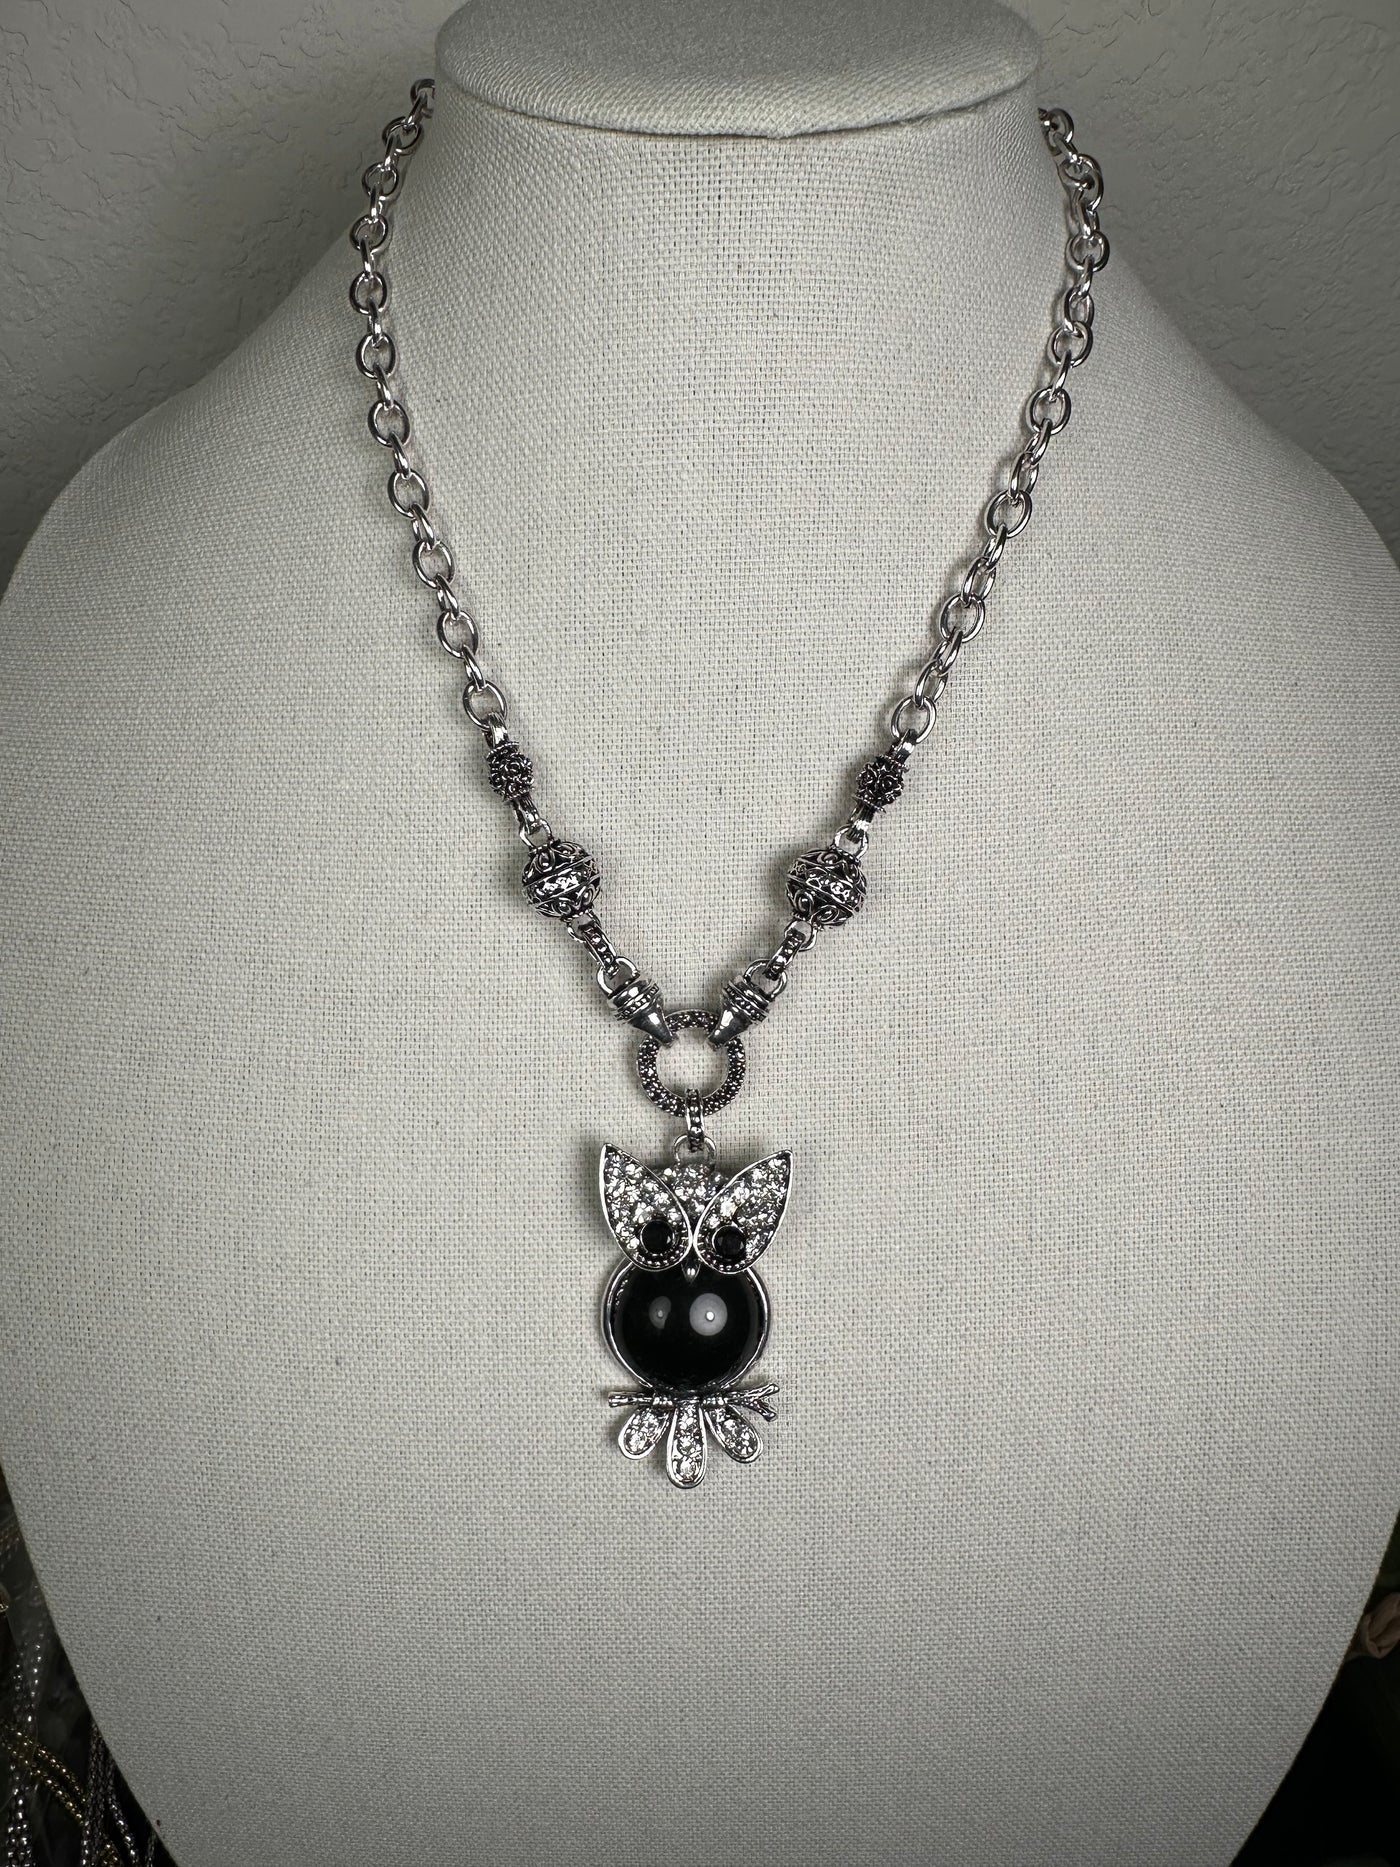 Silver Tone Necklace with Howlite Black Onyx Owl Pendant